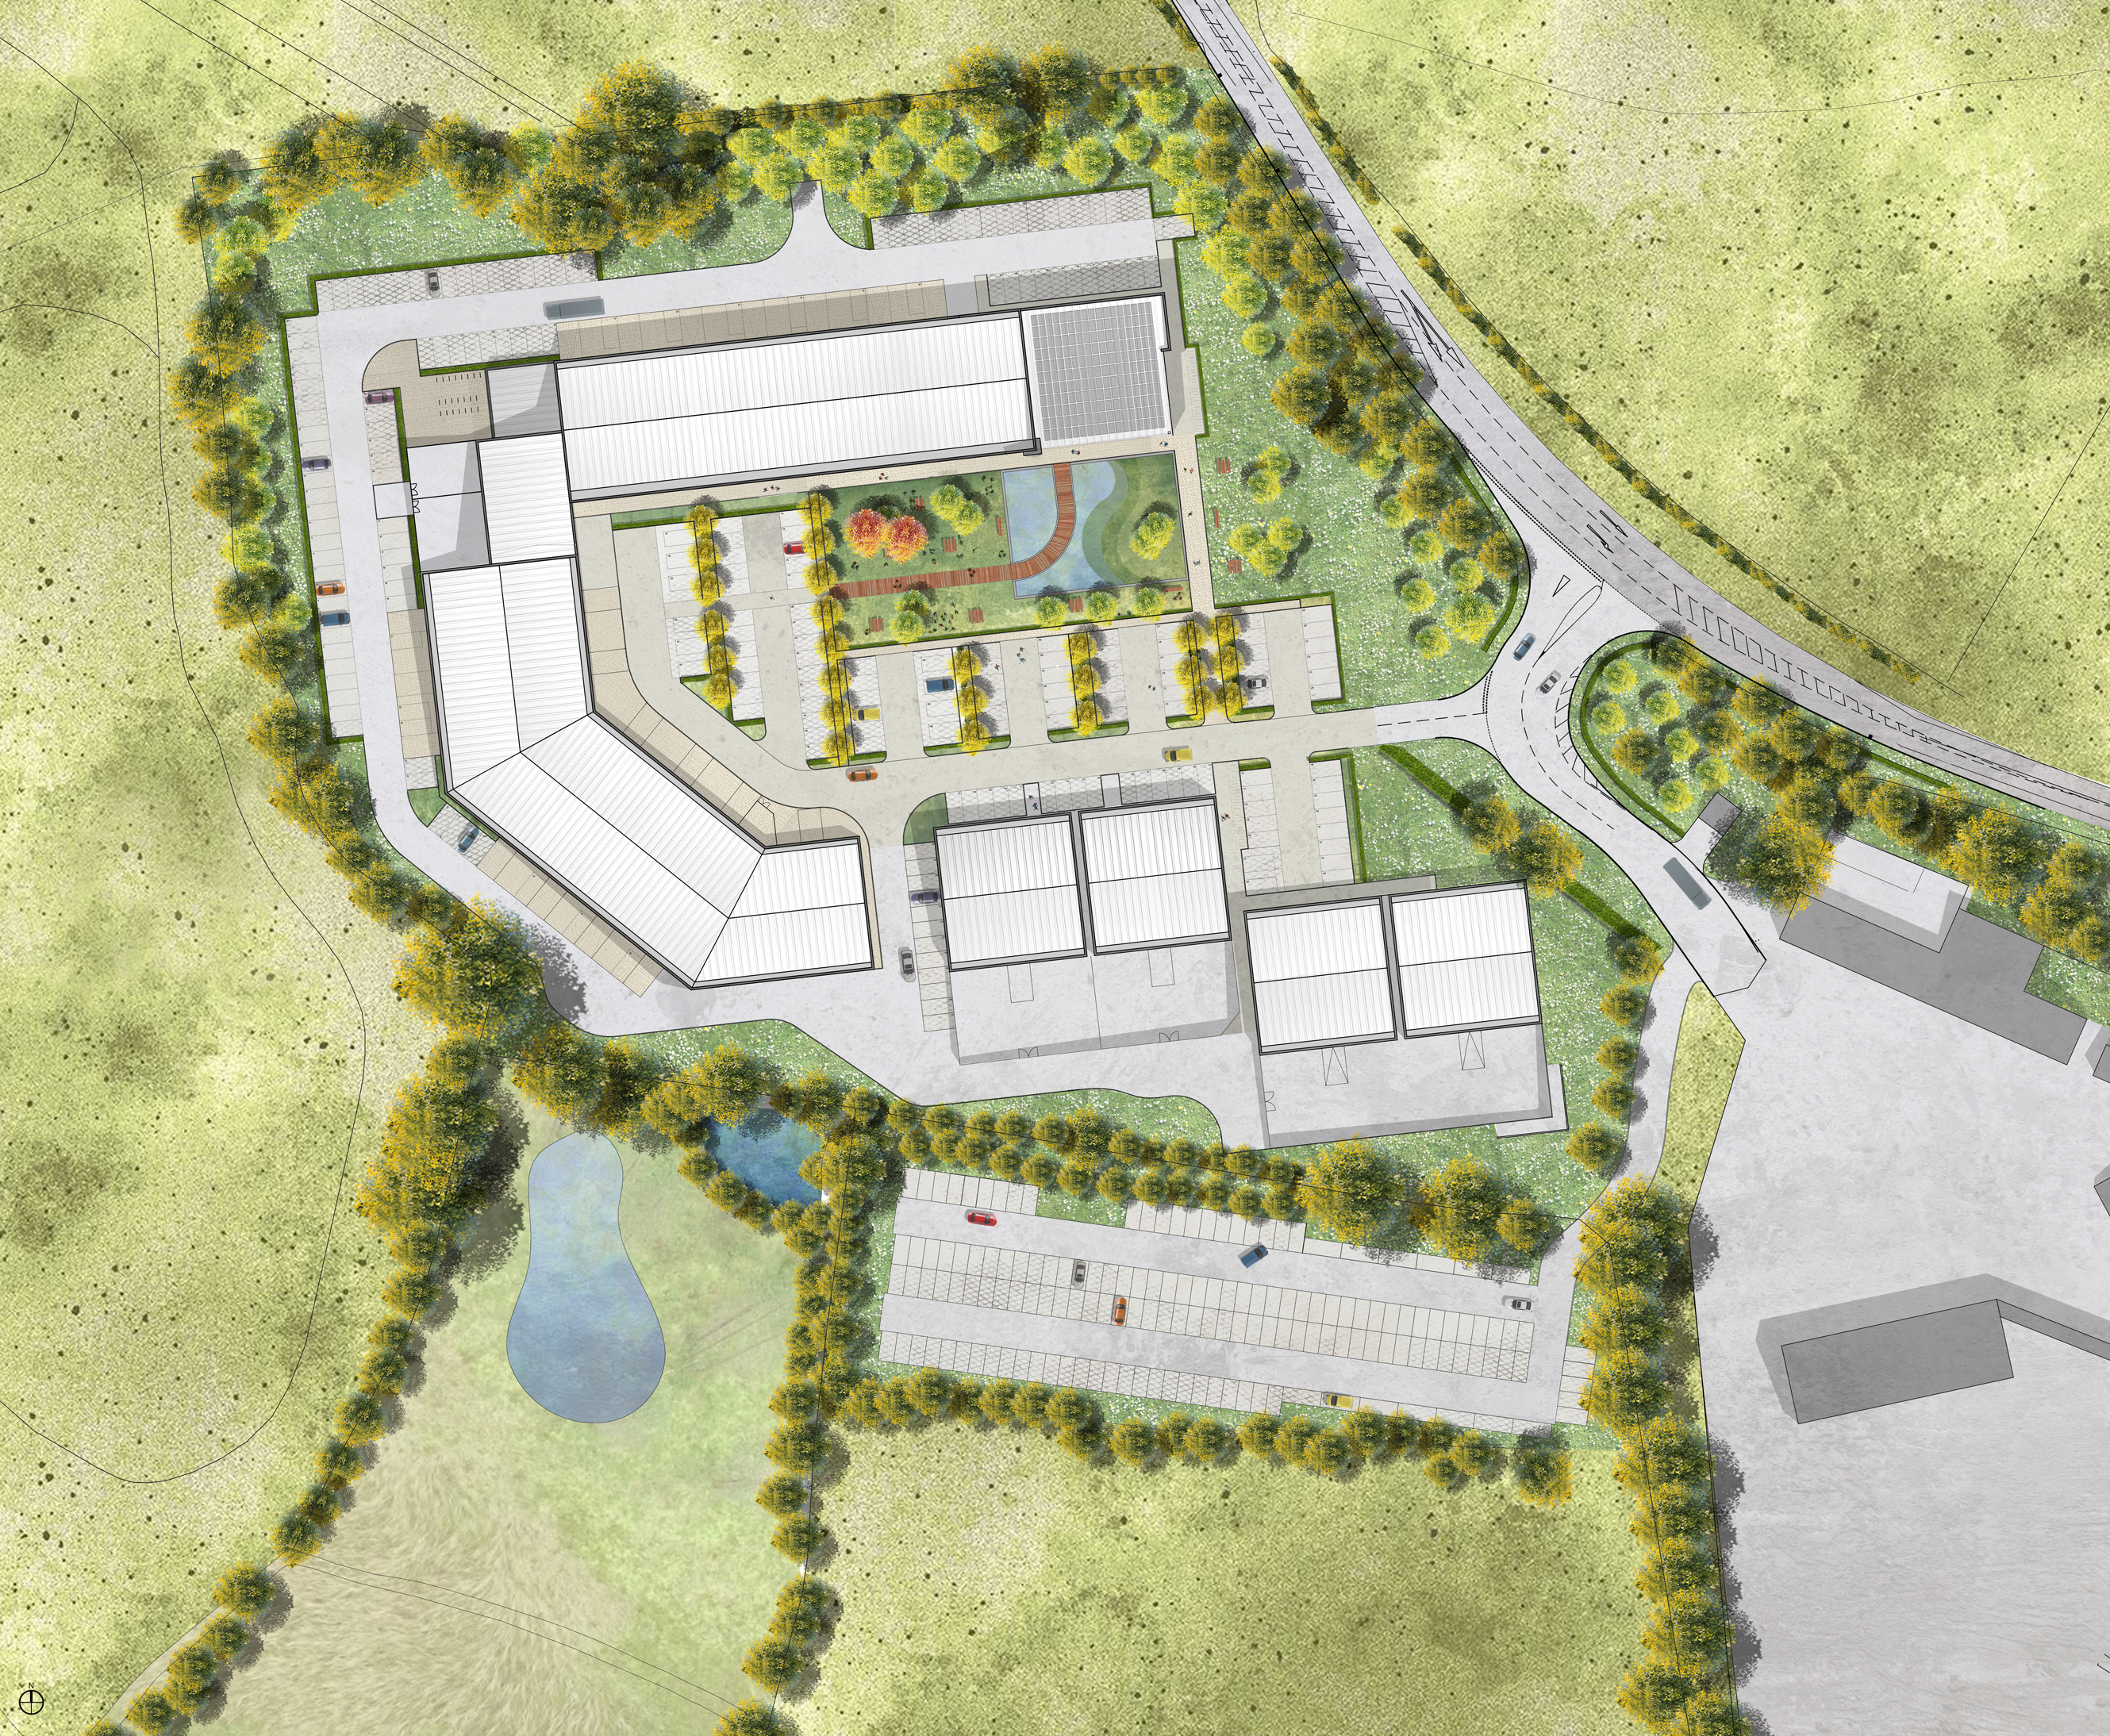 Innovation Centre Proposed Site Plan